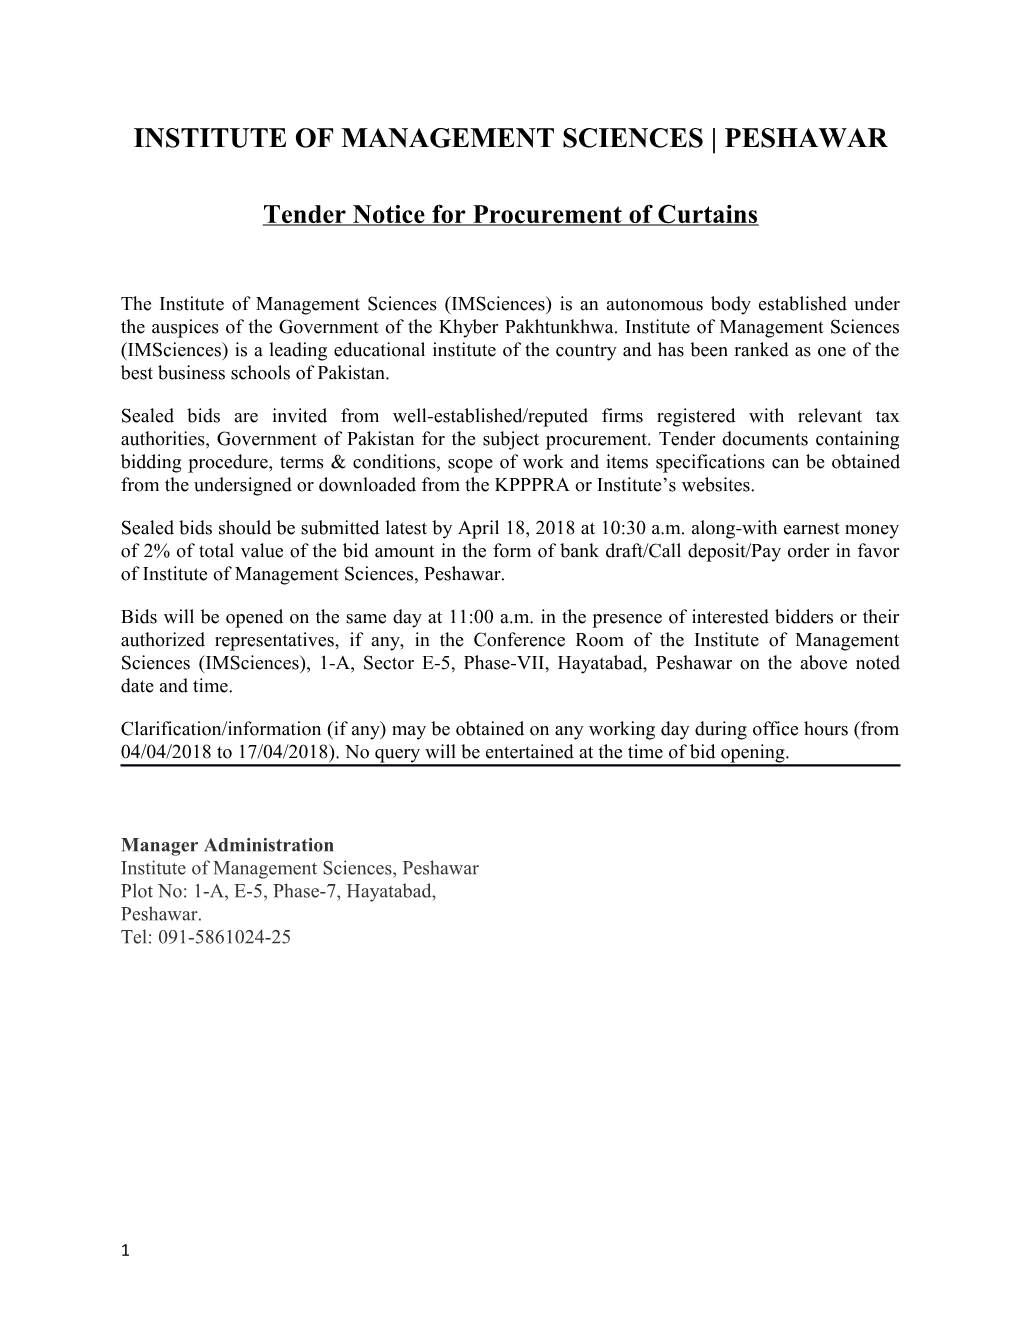 Tender Notice for Procurement of Curtains